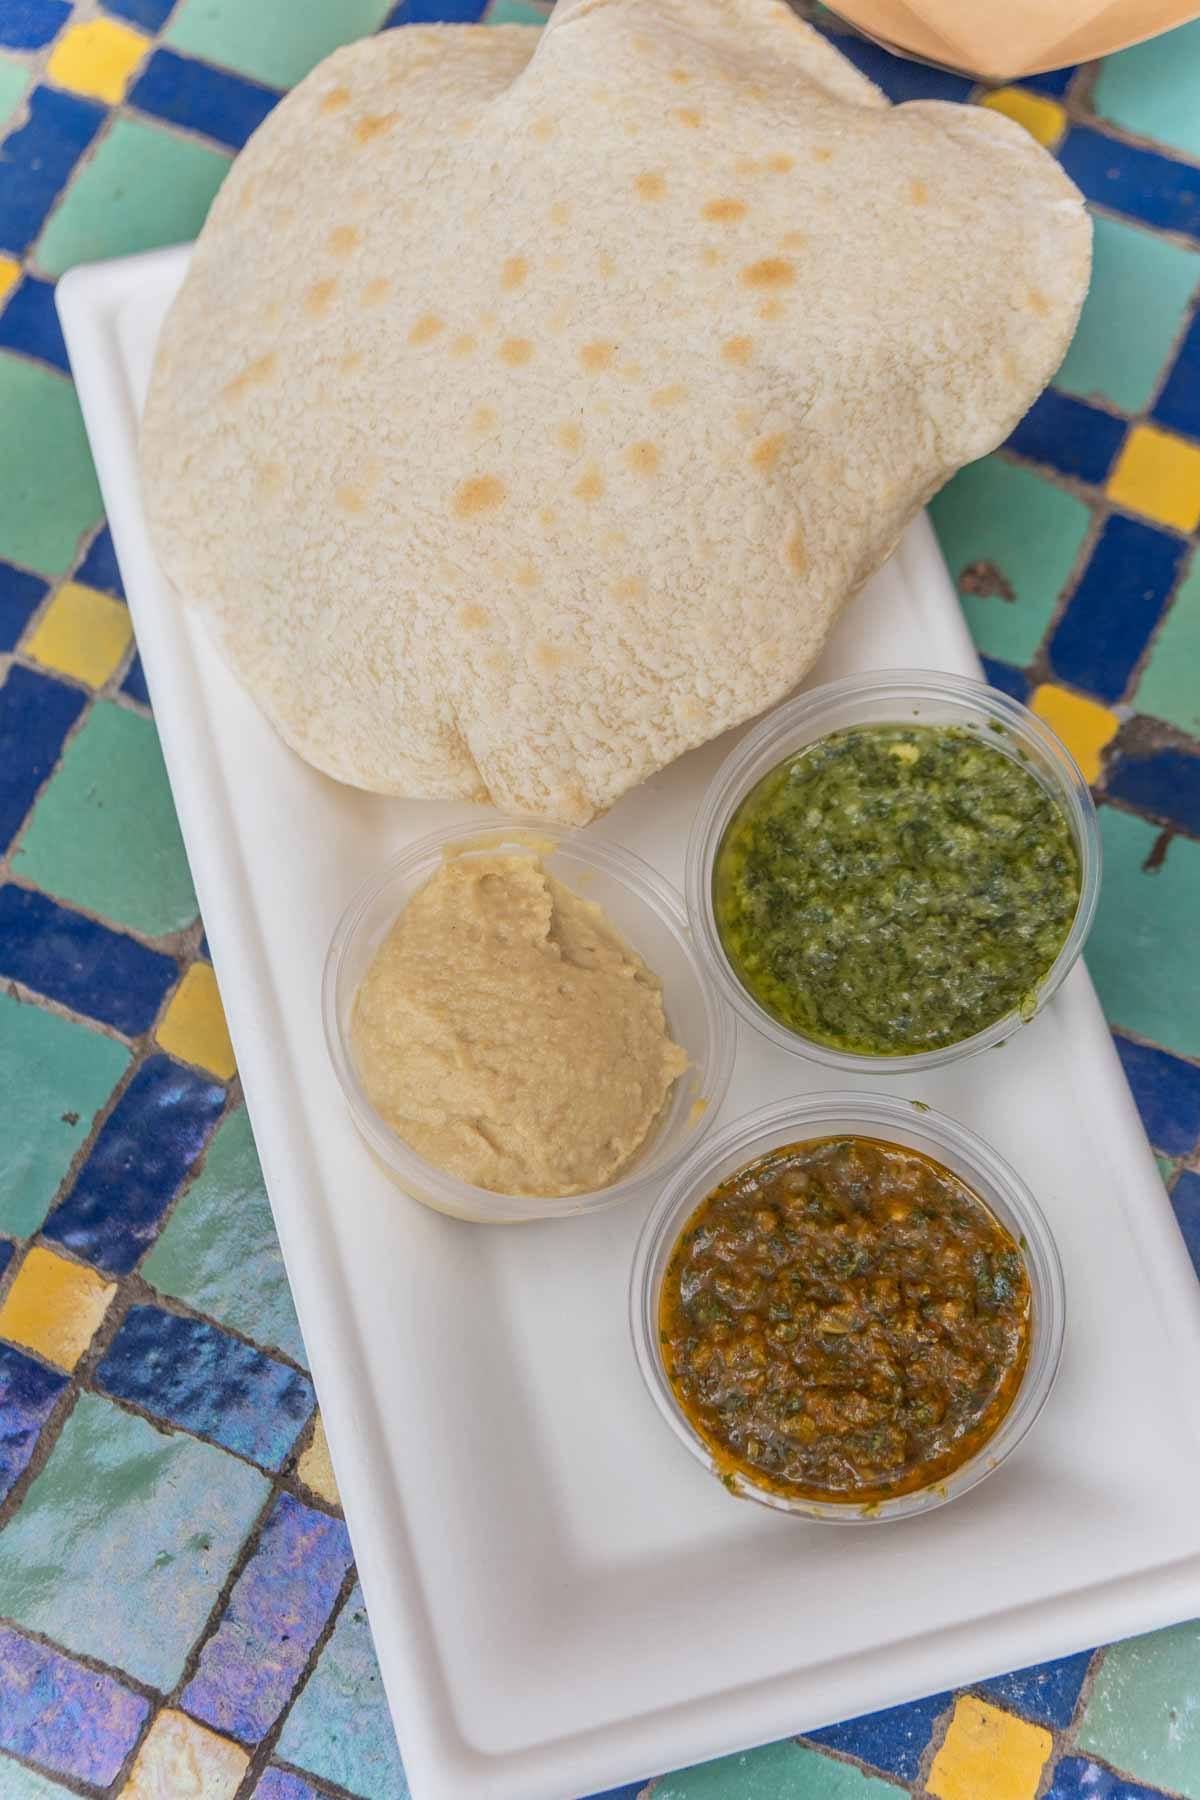 moroccan bread and dips on a plate